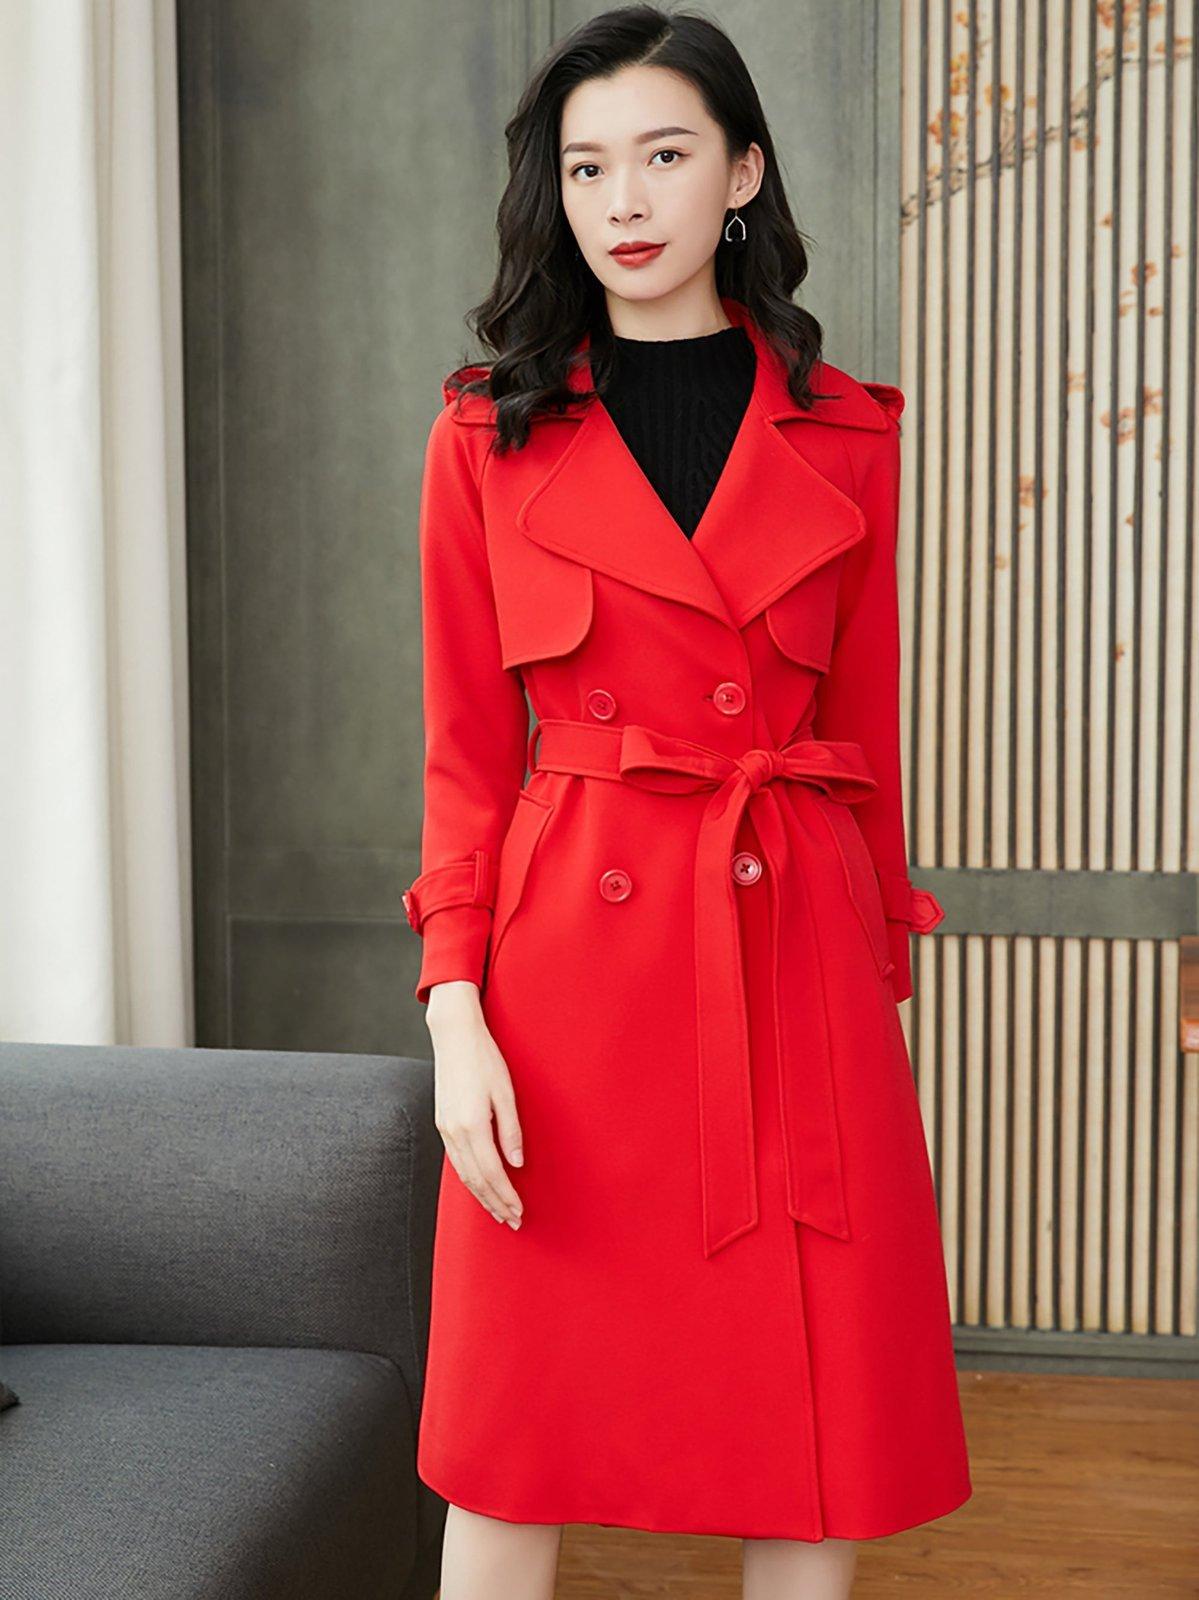 110 Red Trench coat ideas in 2023  red trench coat, coat, trench coat